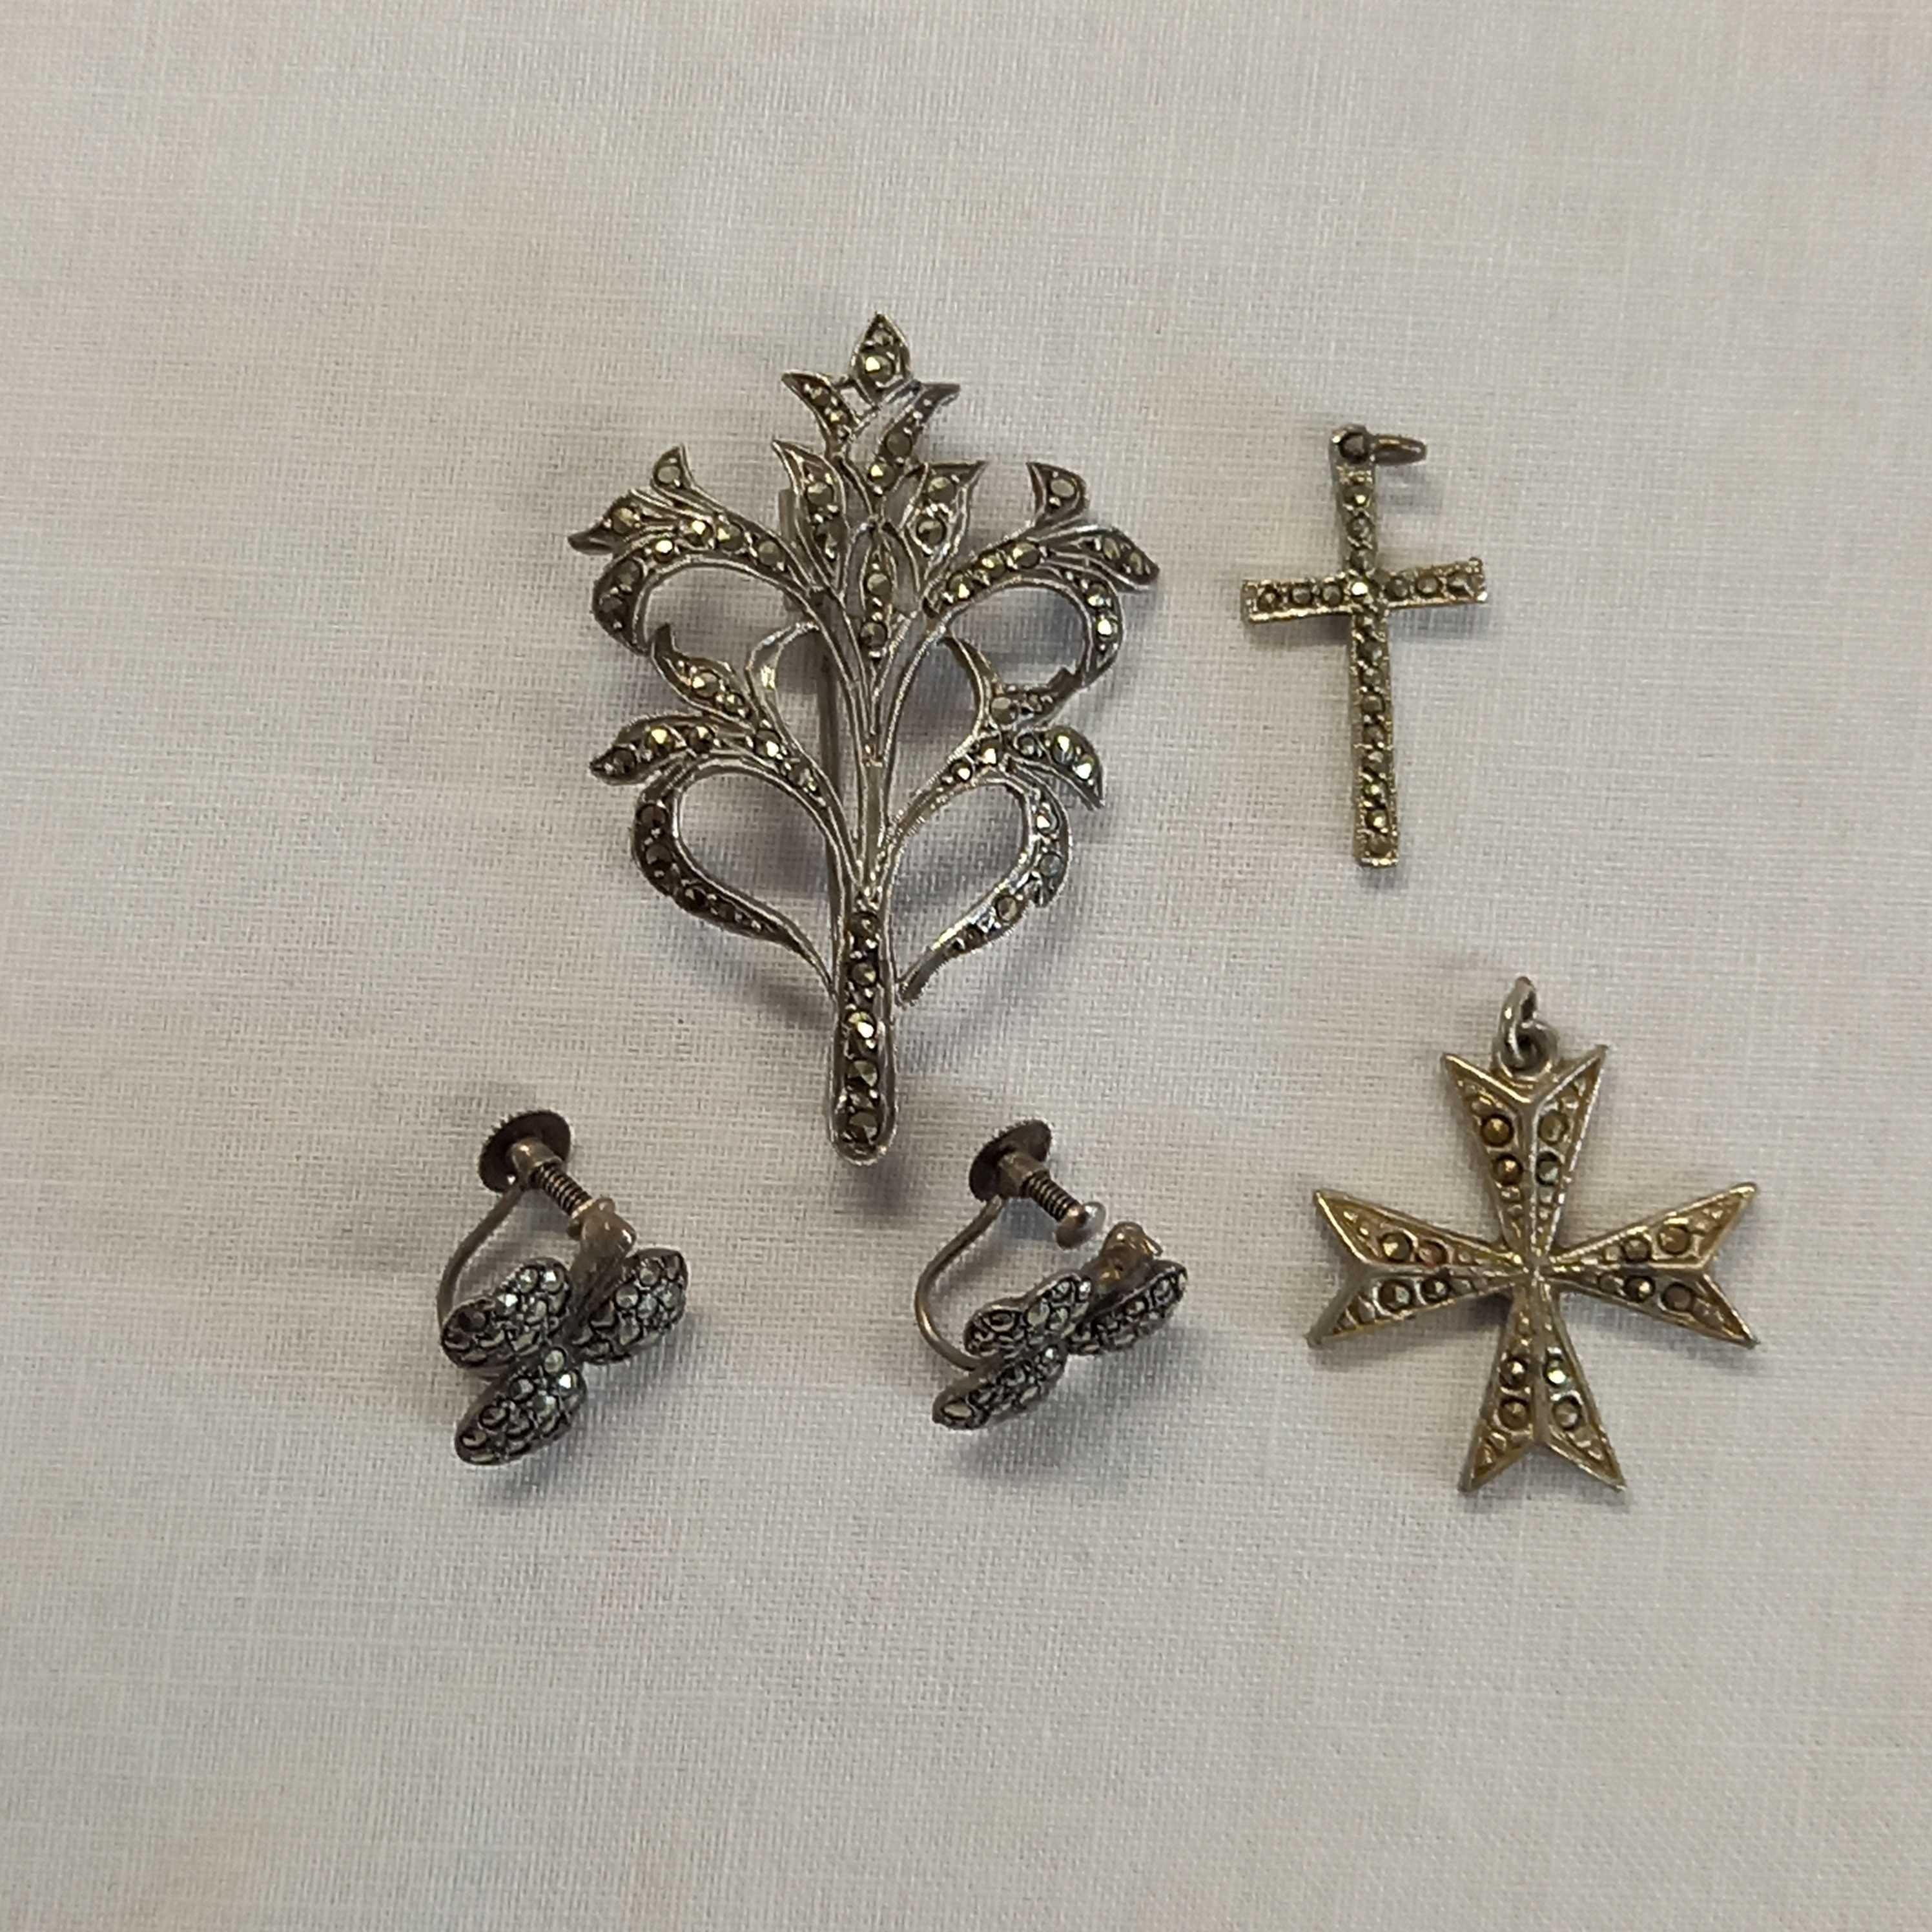 A PAIR OF SILVER & MARCASITE CLOVER LEAF SCREW EARRINGS & A SIMILAR BROOCH